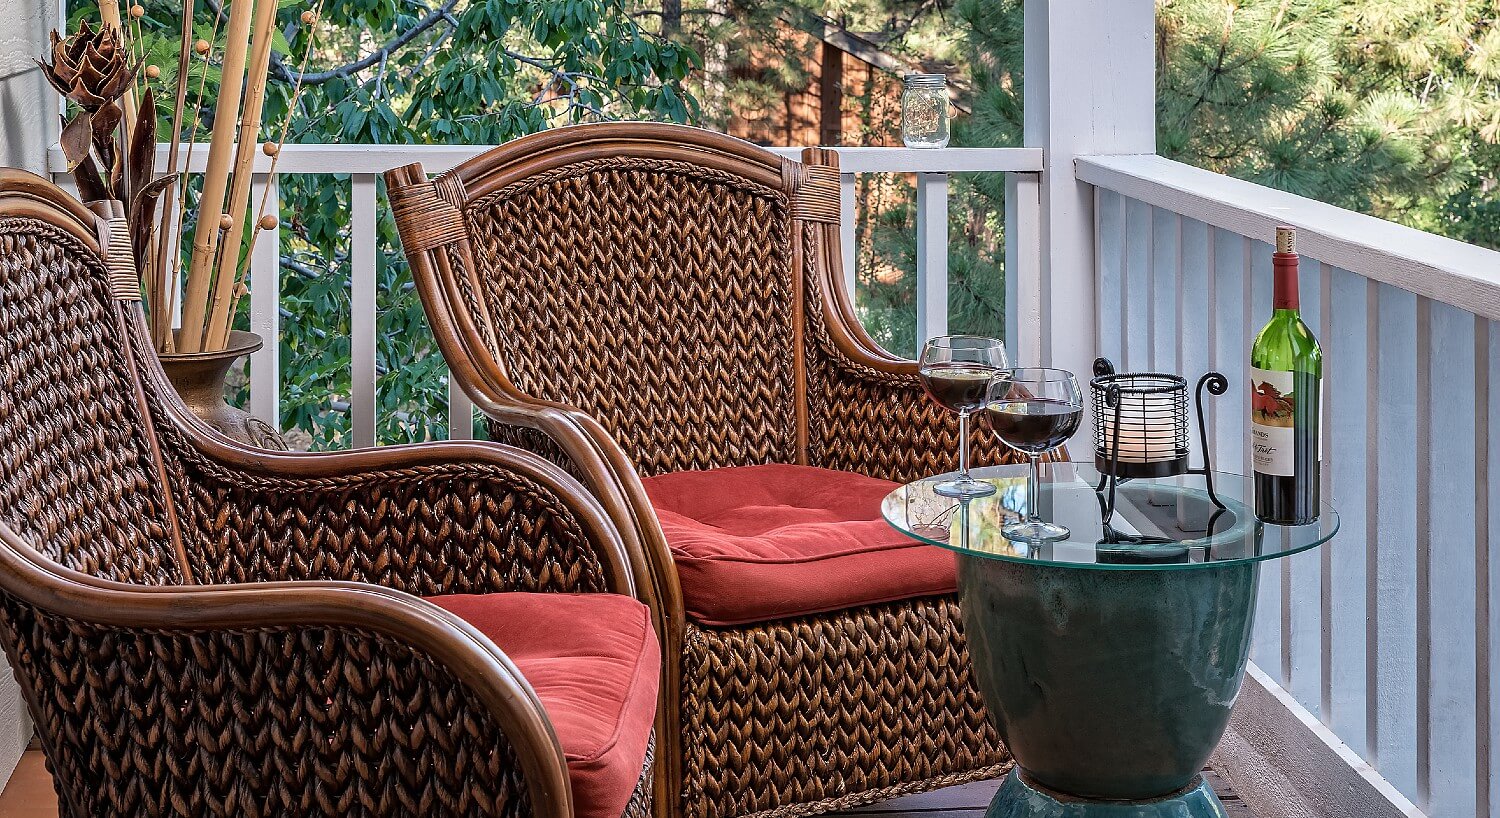 Two brown wicker chairs with red cushions outdoors on a small patio with glass table holding bottle of wine and two glasses